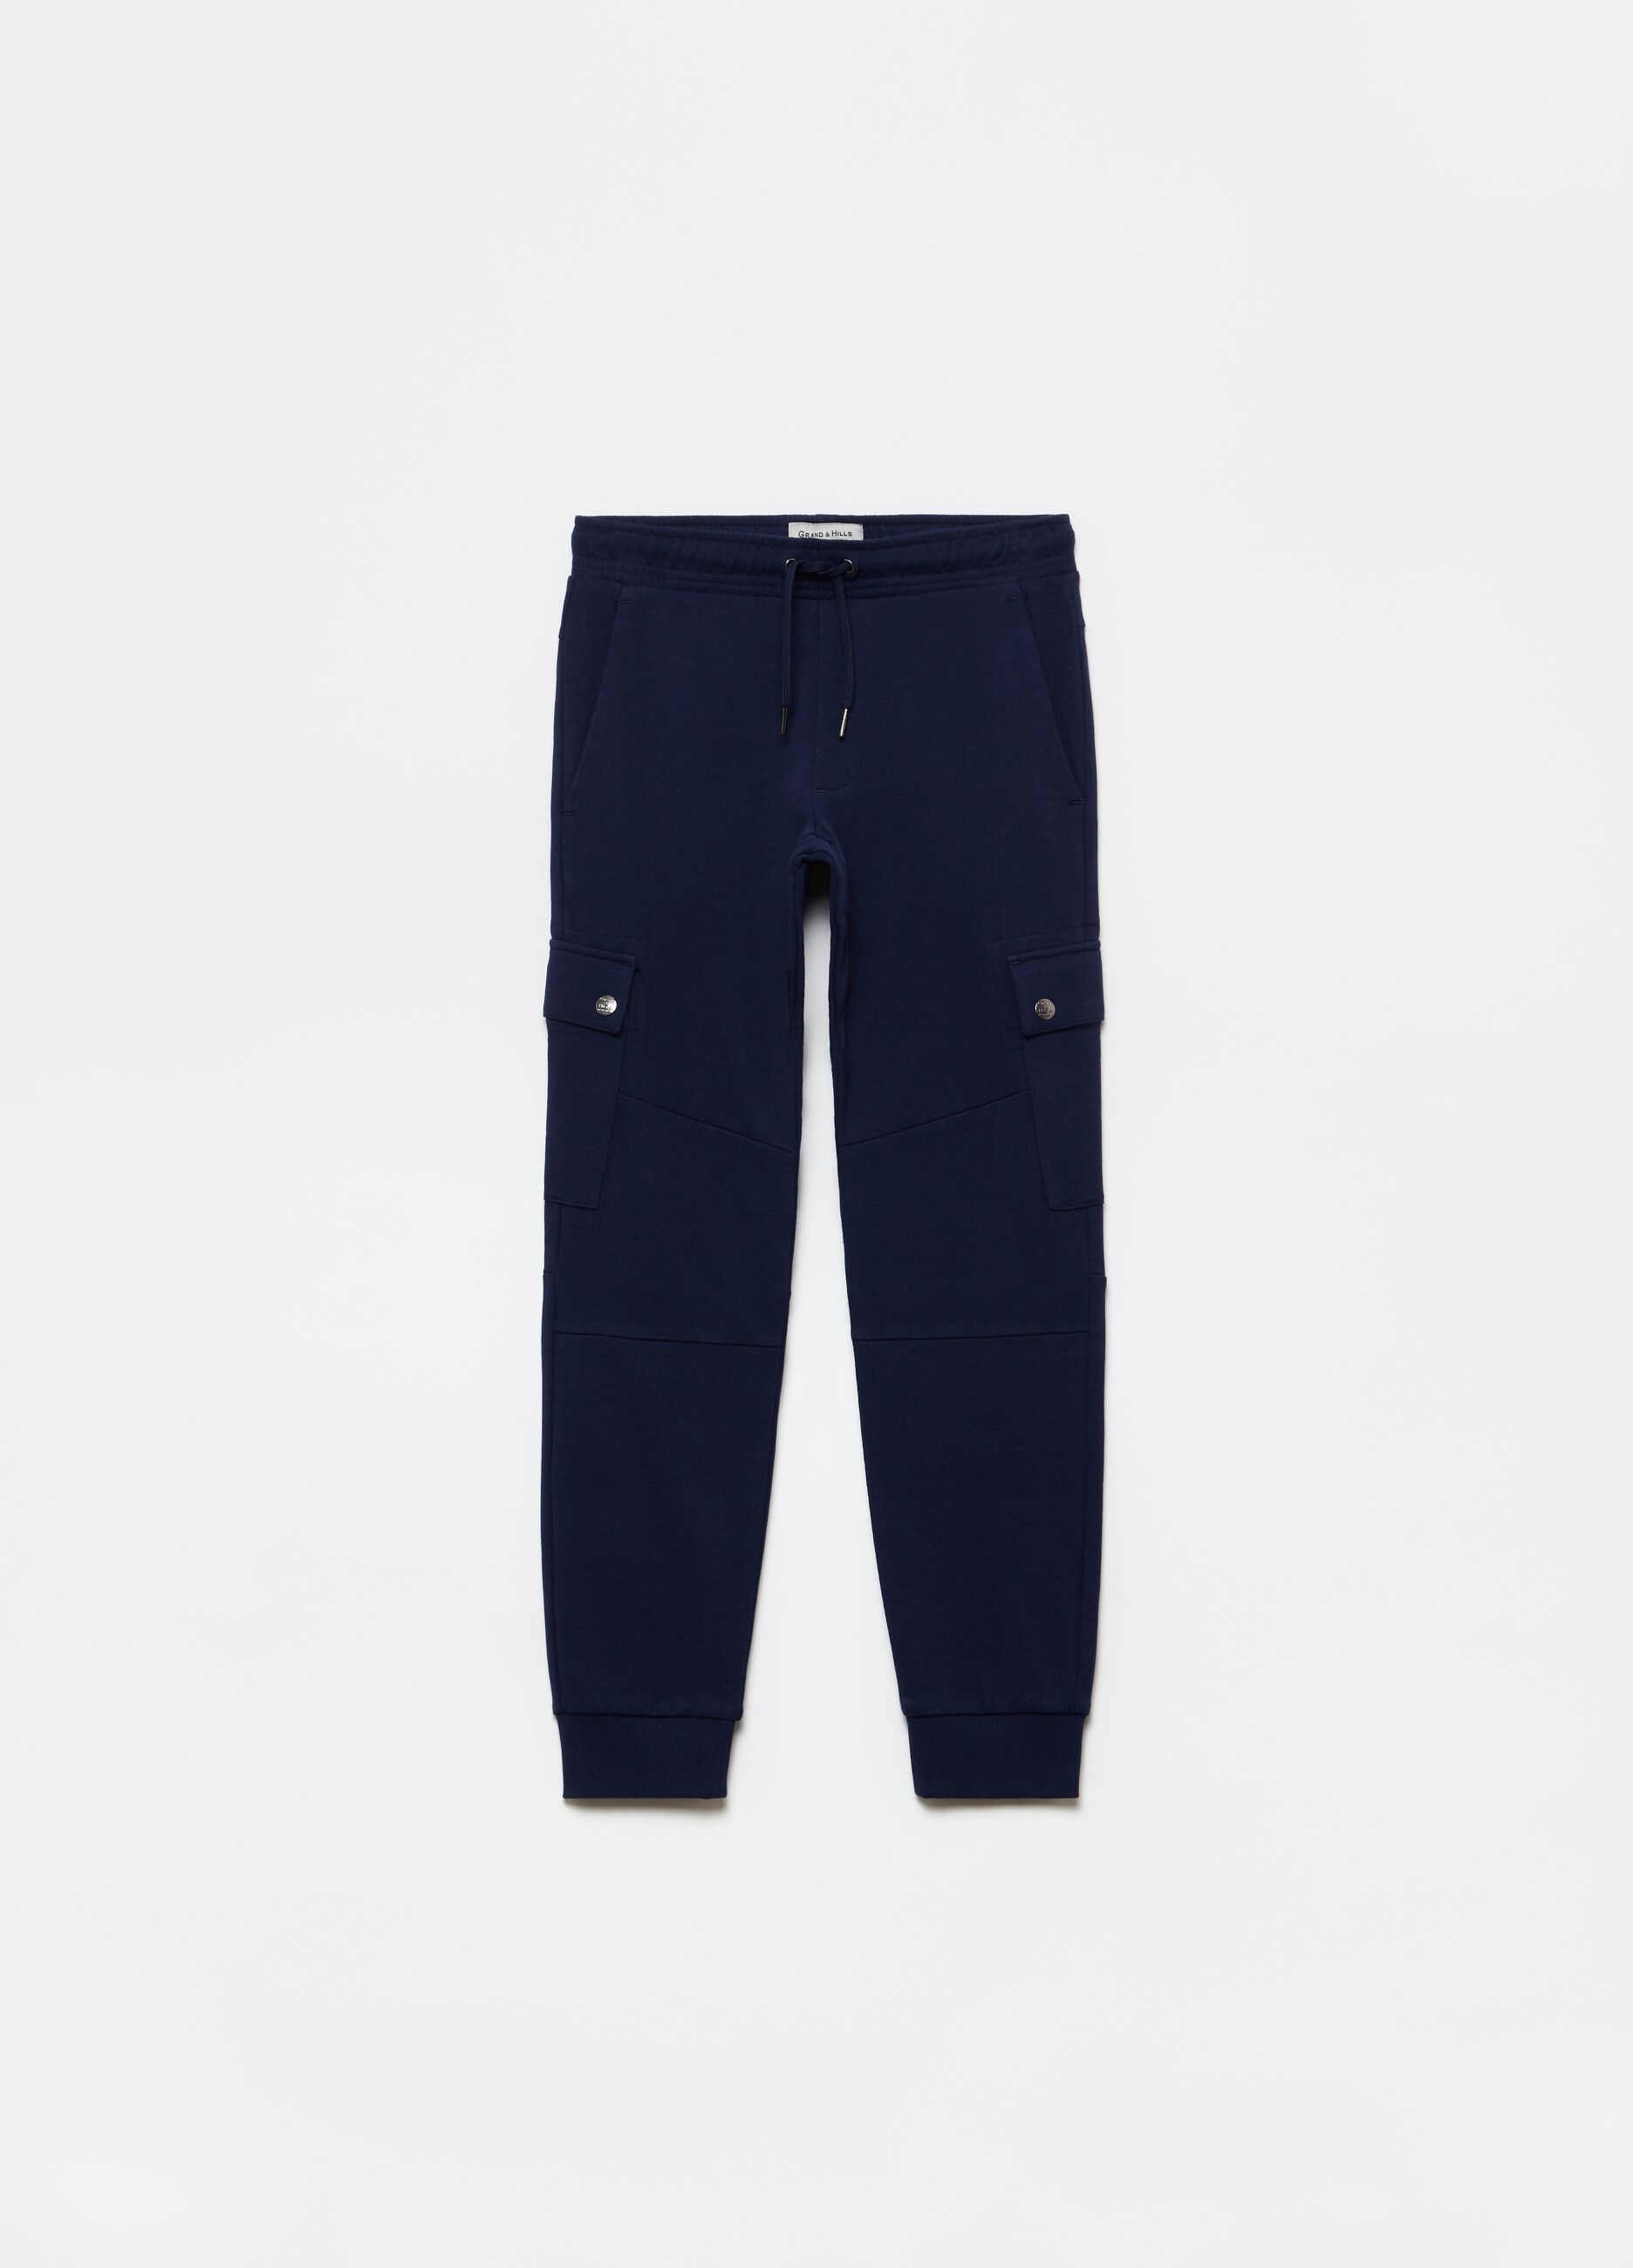 Solid colour cargo joggers with pockets